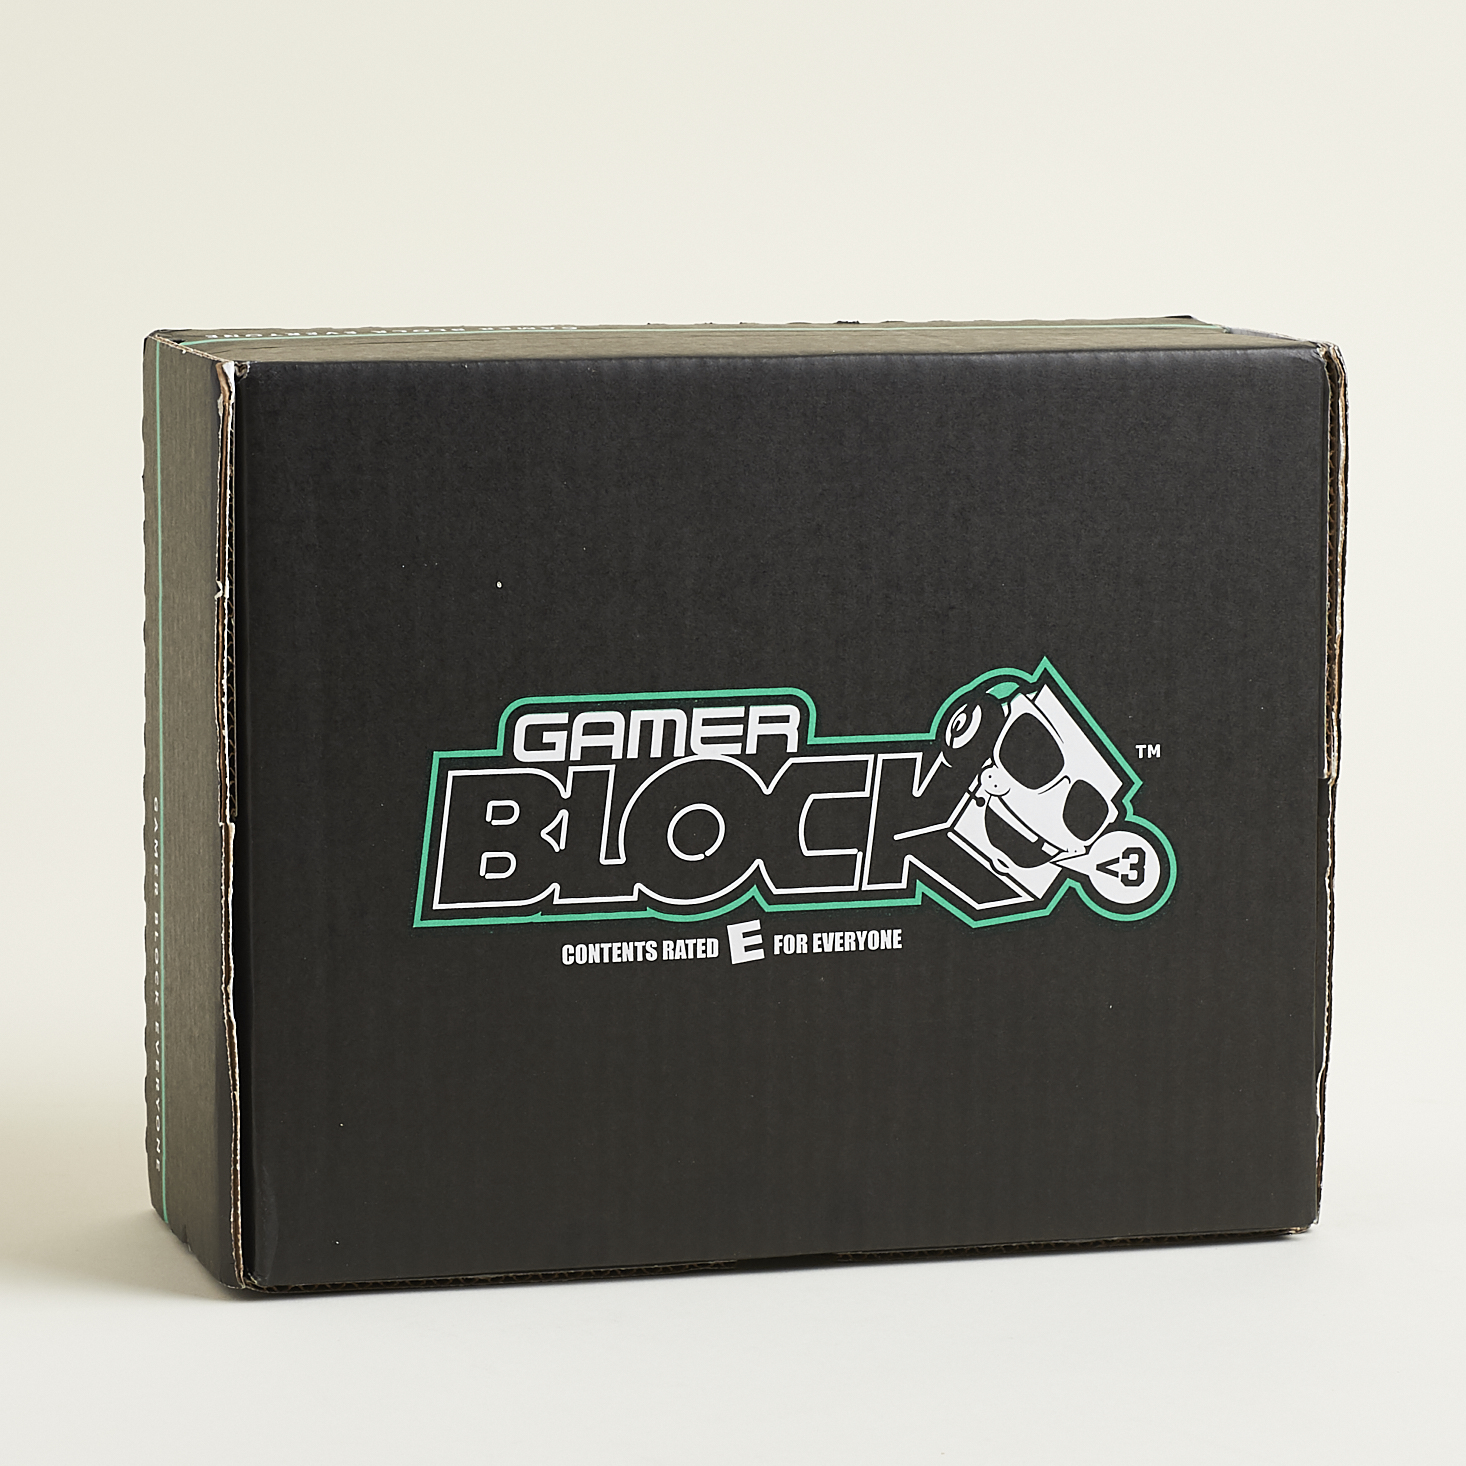 Gamer Block: E For Everyone Subscription Box Review + Coupon – April 2017